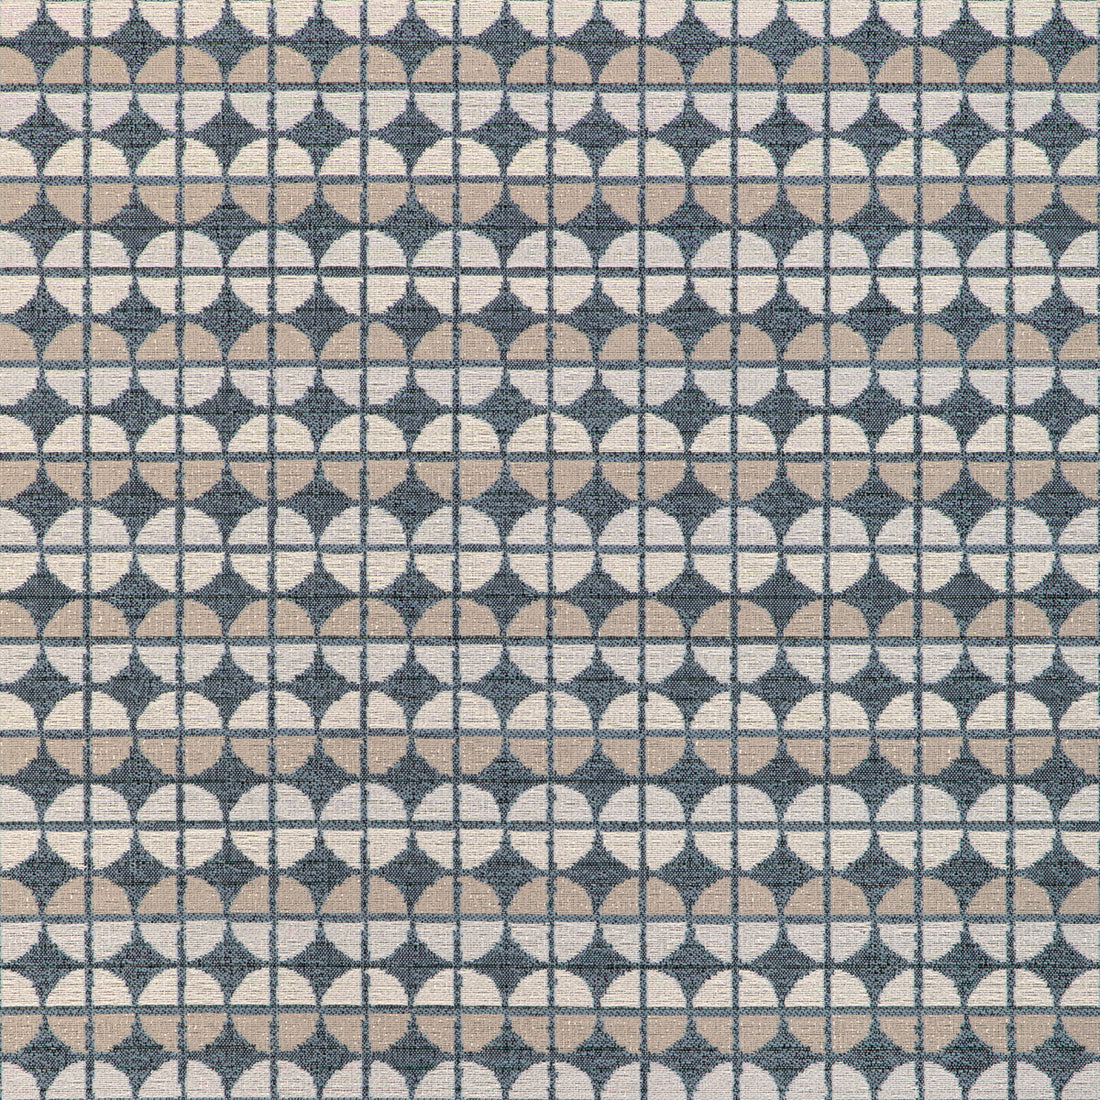 Decoy fabric in riverstone color - pattern 37051.1161.0 - by Kravet Contract in the Chesapeake collection